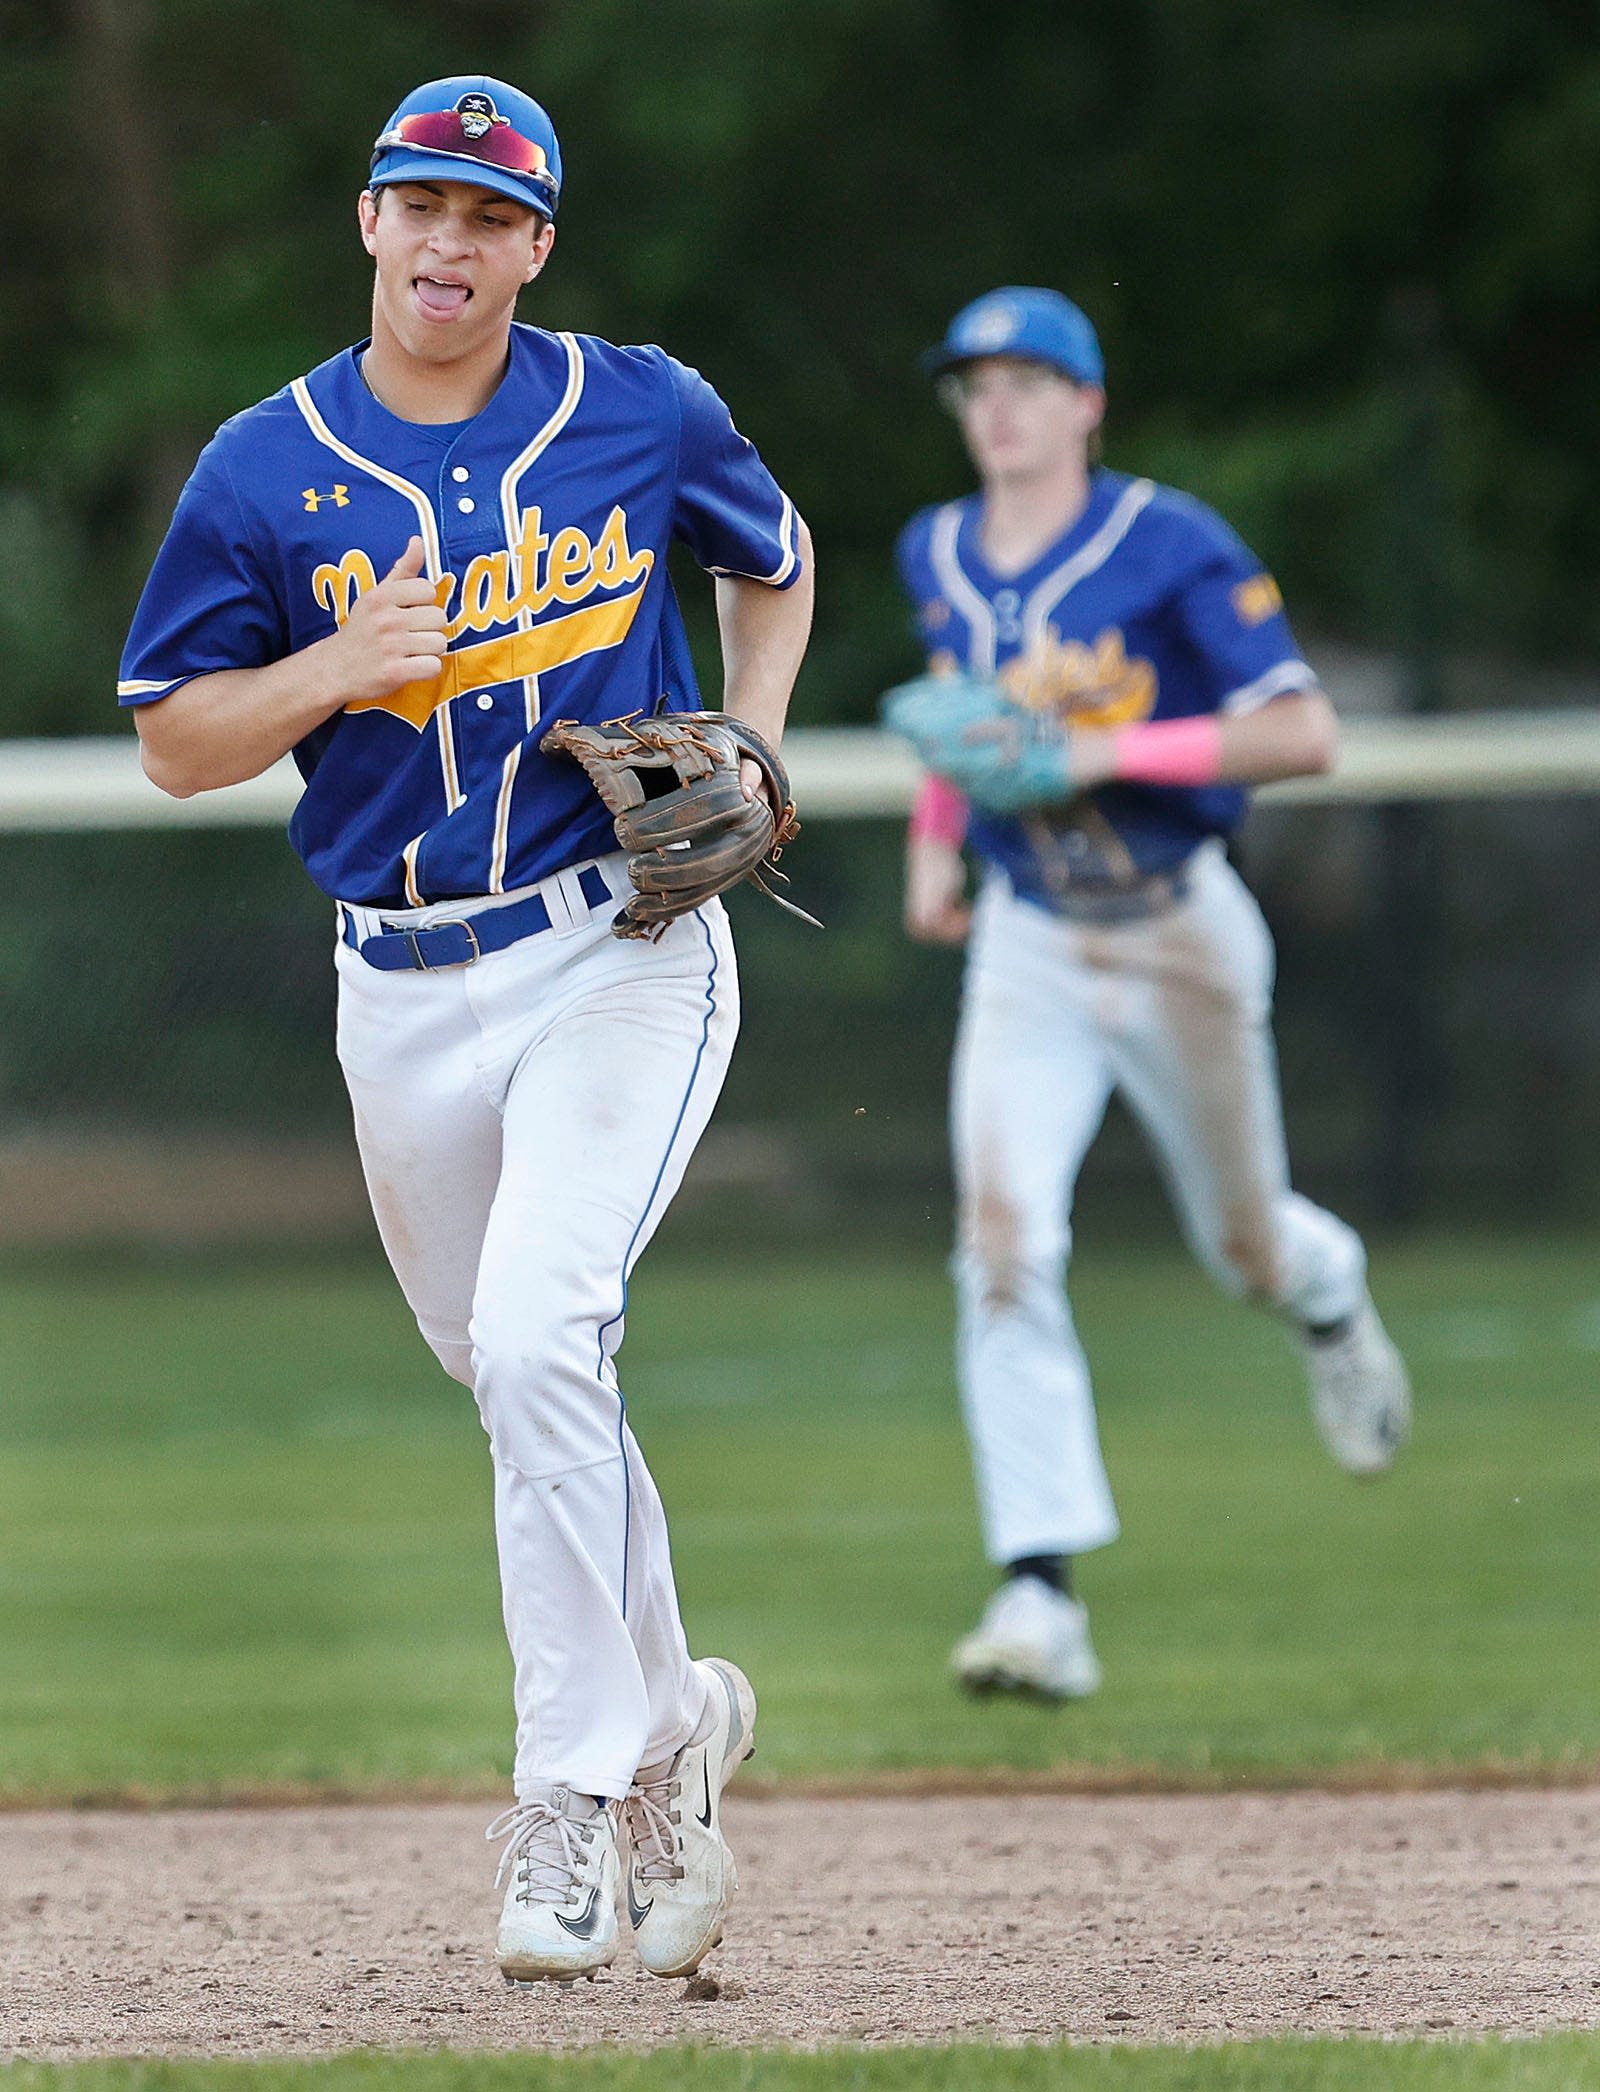 'A real step up': After two-year absence, Hull baseball is back in the Div. 5 playoff mix